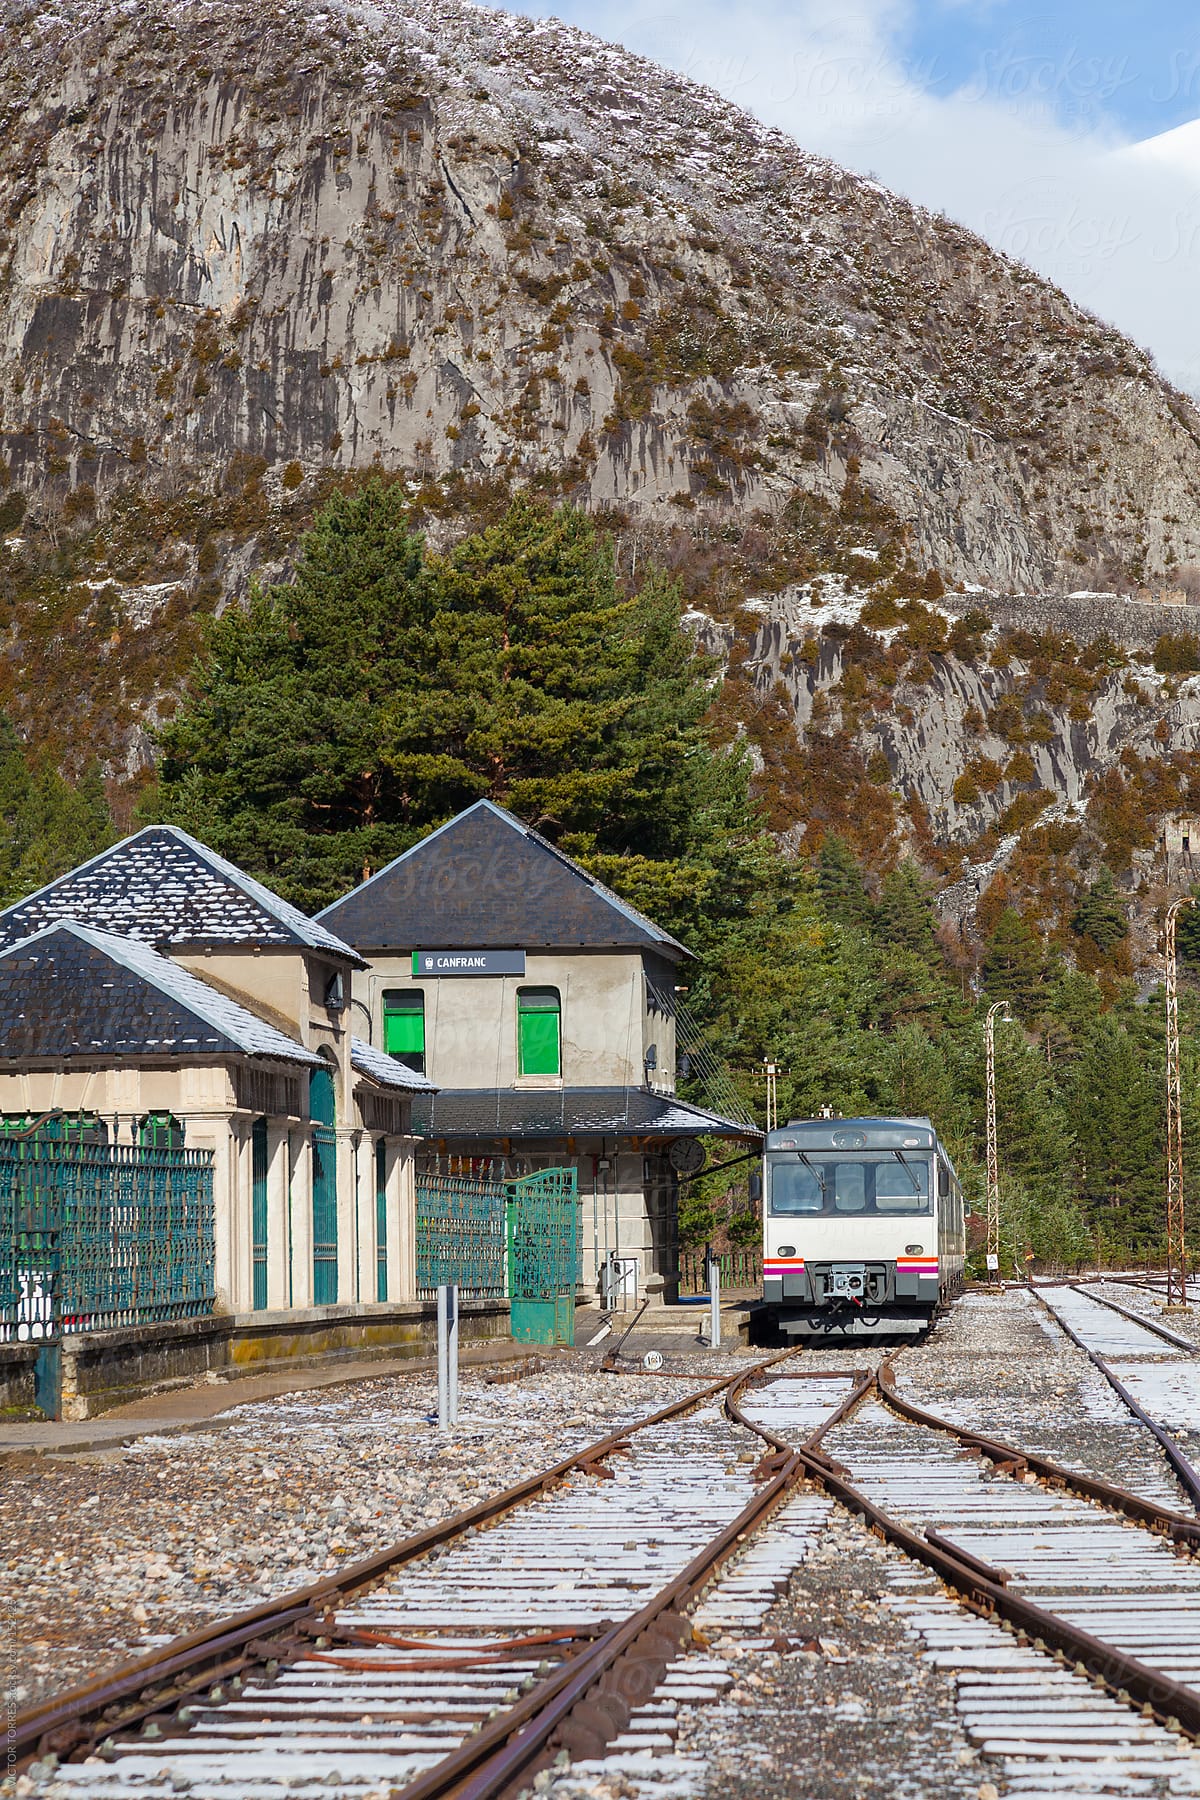 Canfranc Railway Station